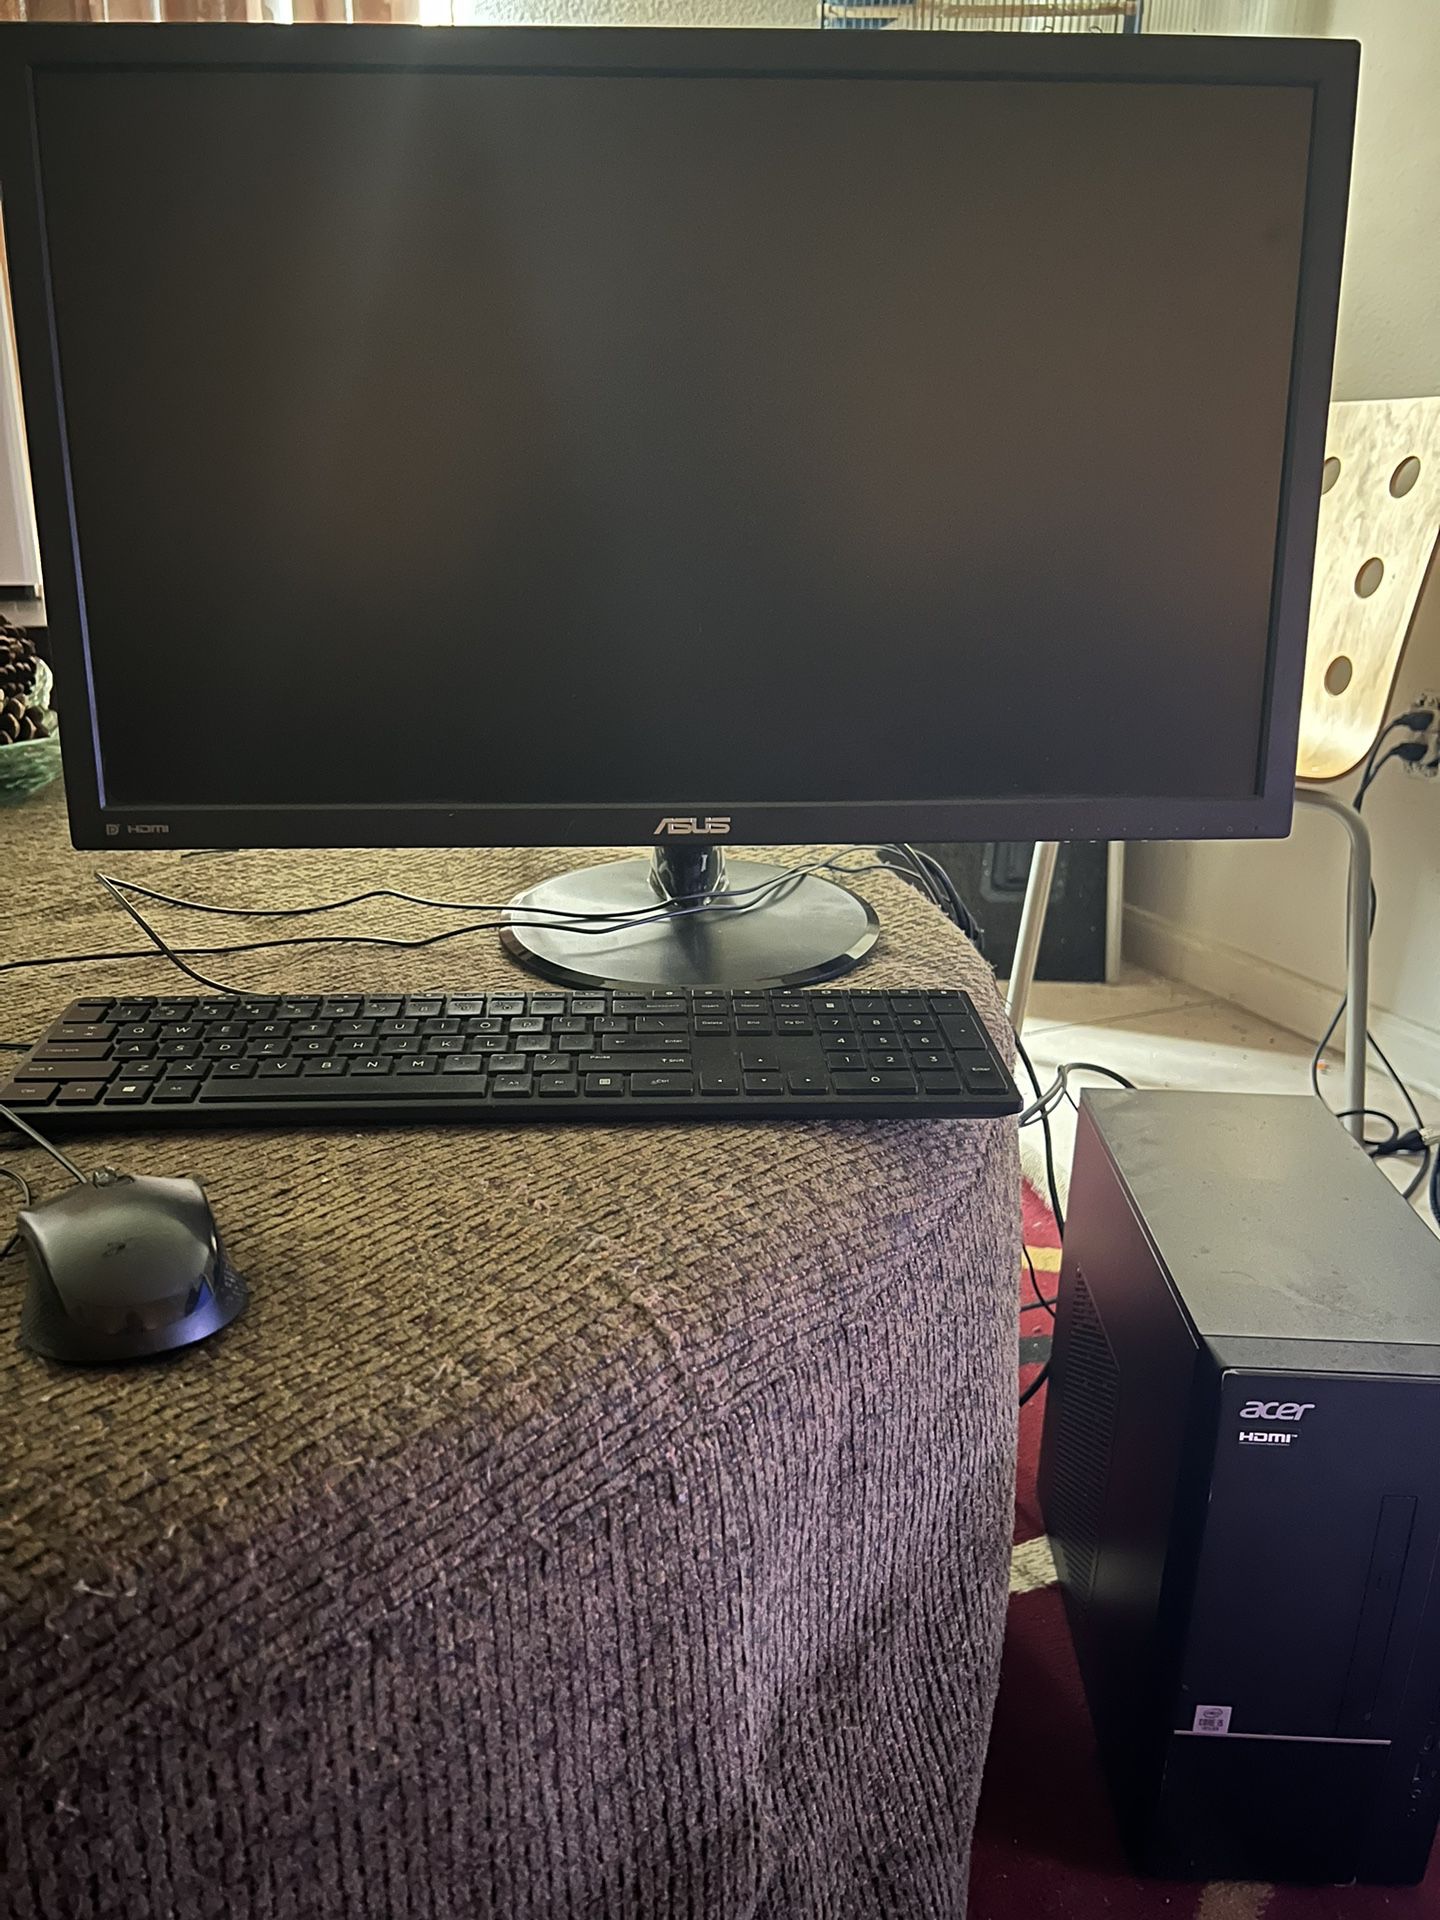 Acer Hdmi Computer Desktop With Aesus Monitor 27in